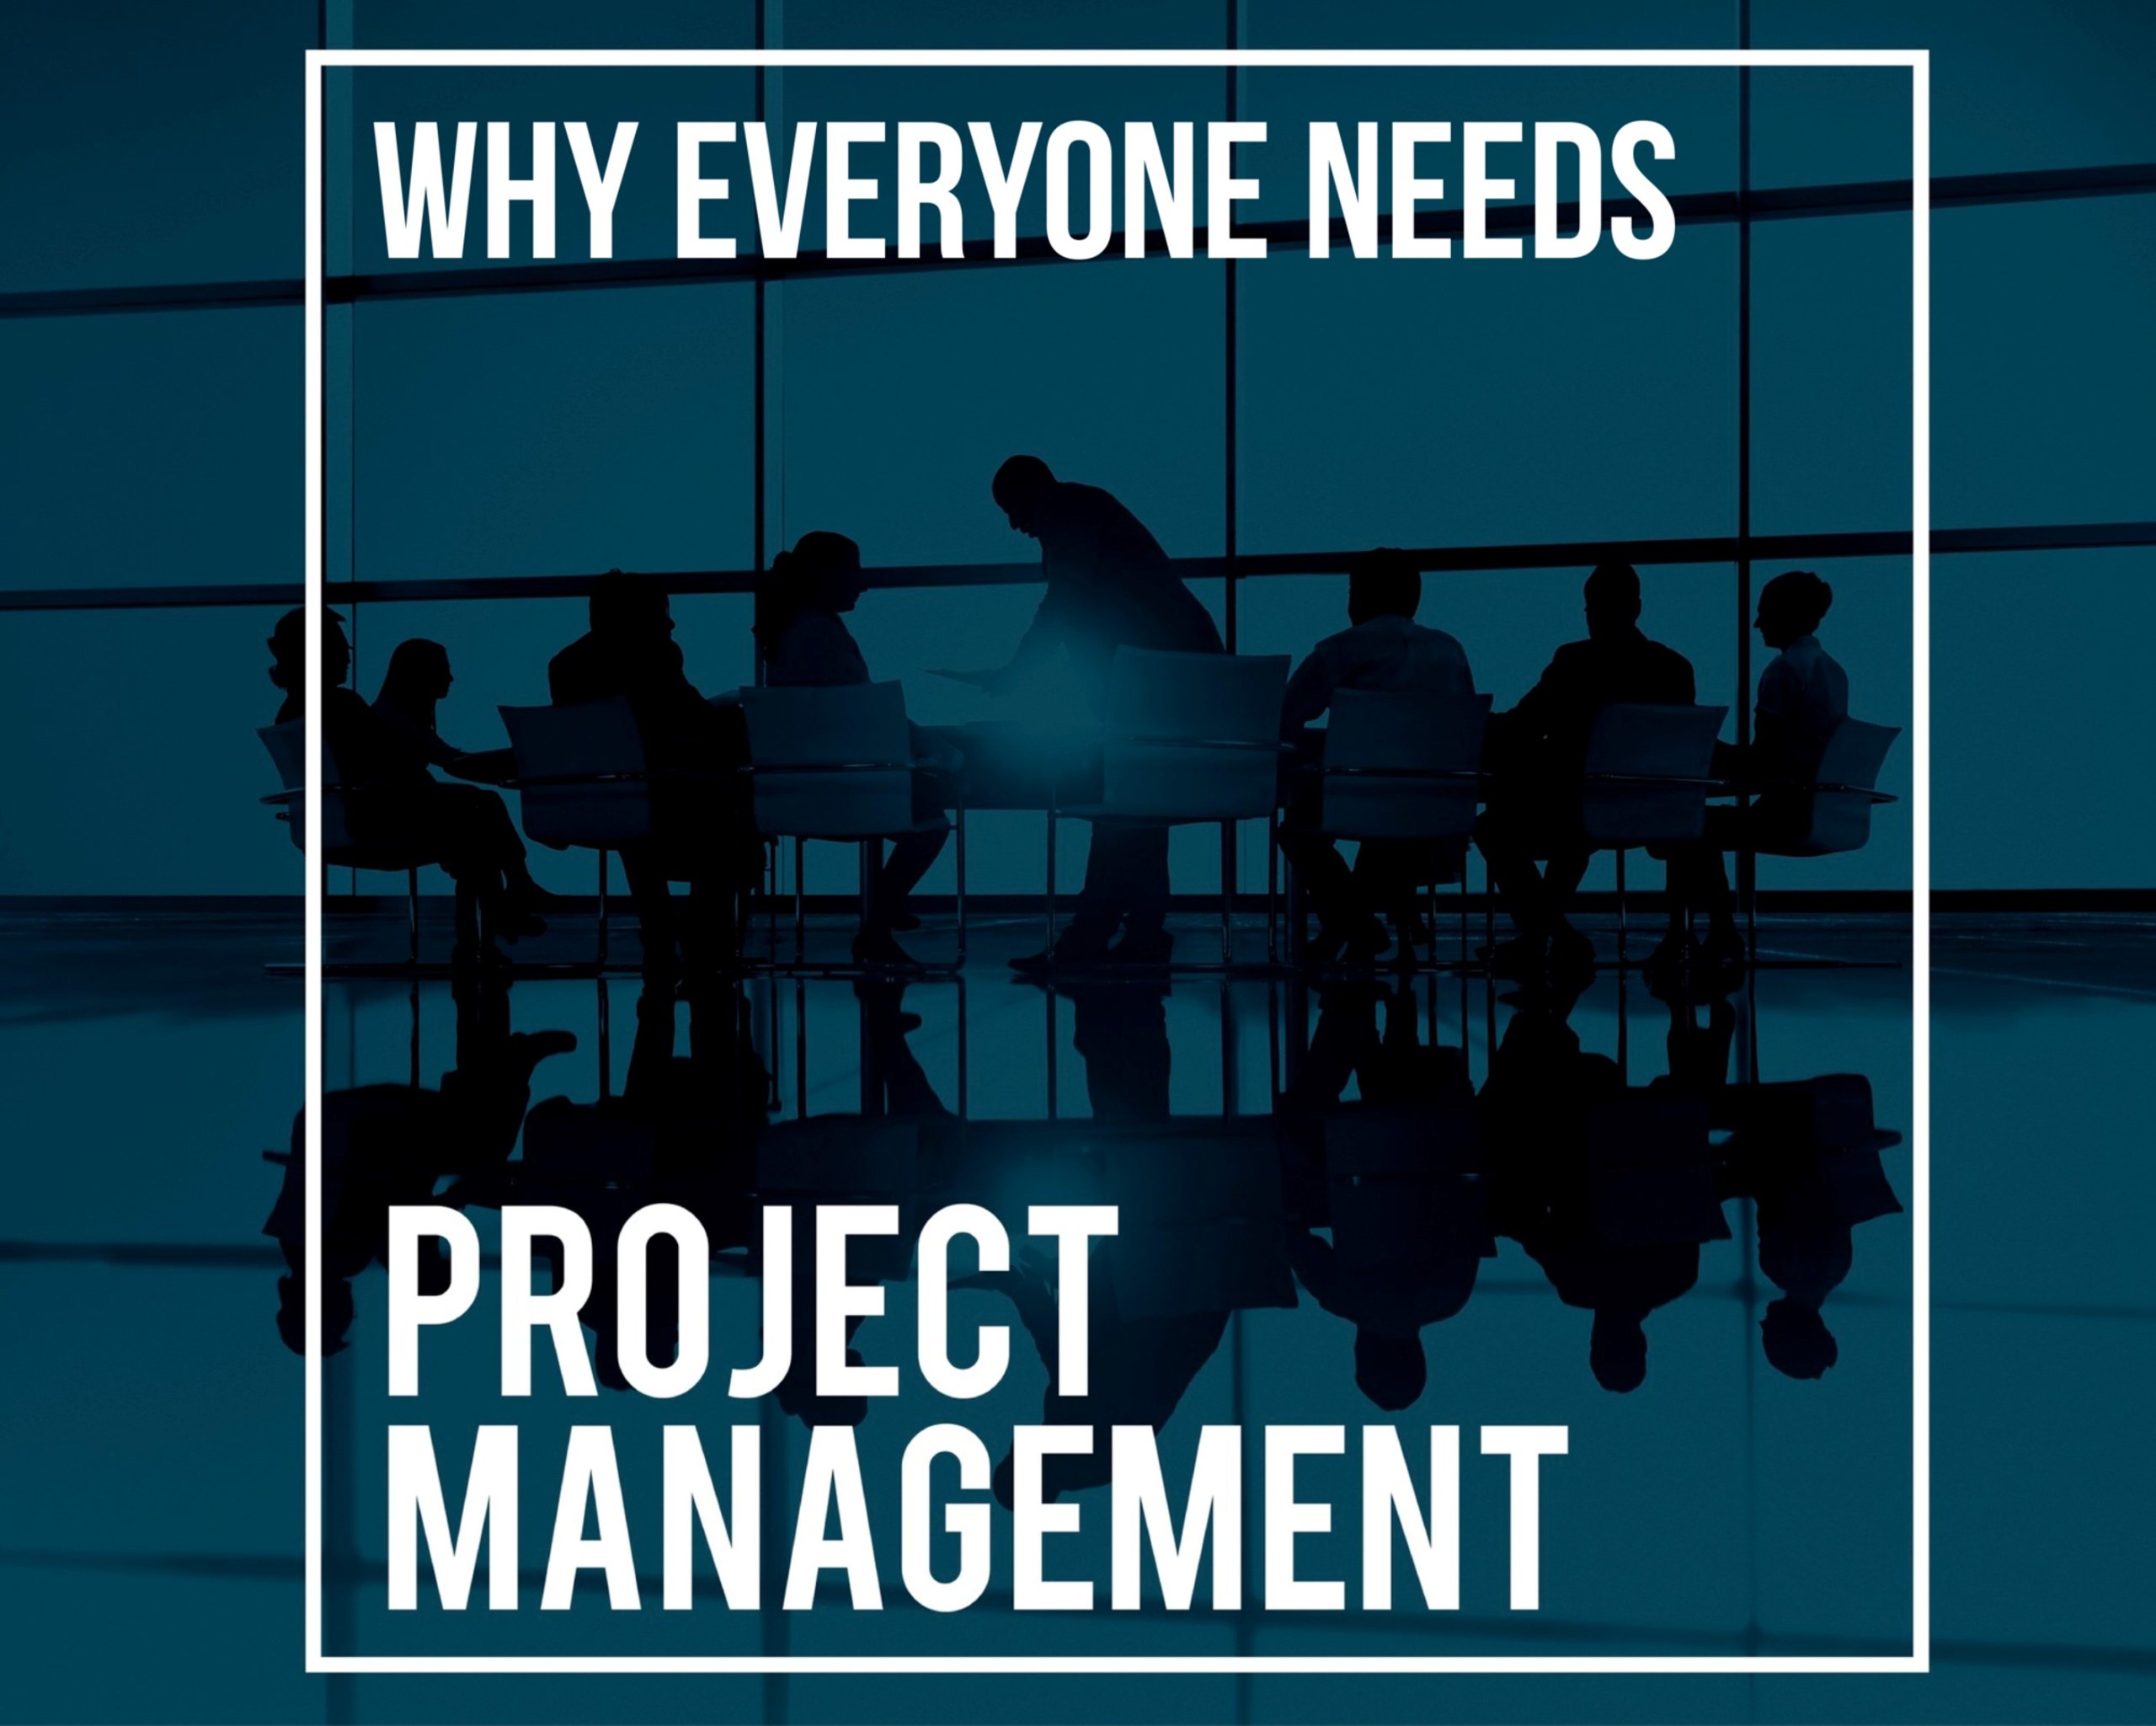 Why everyone needs project management